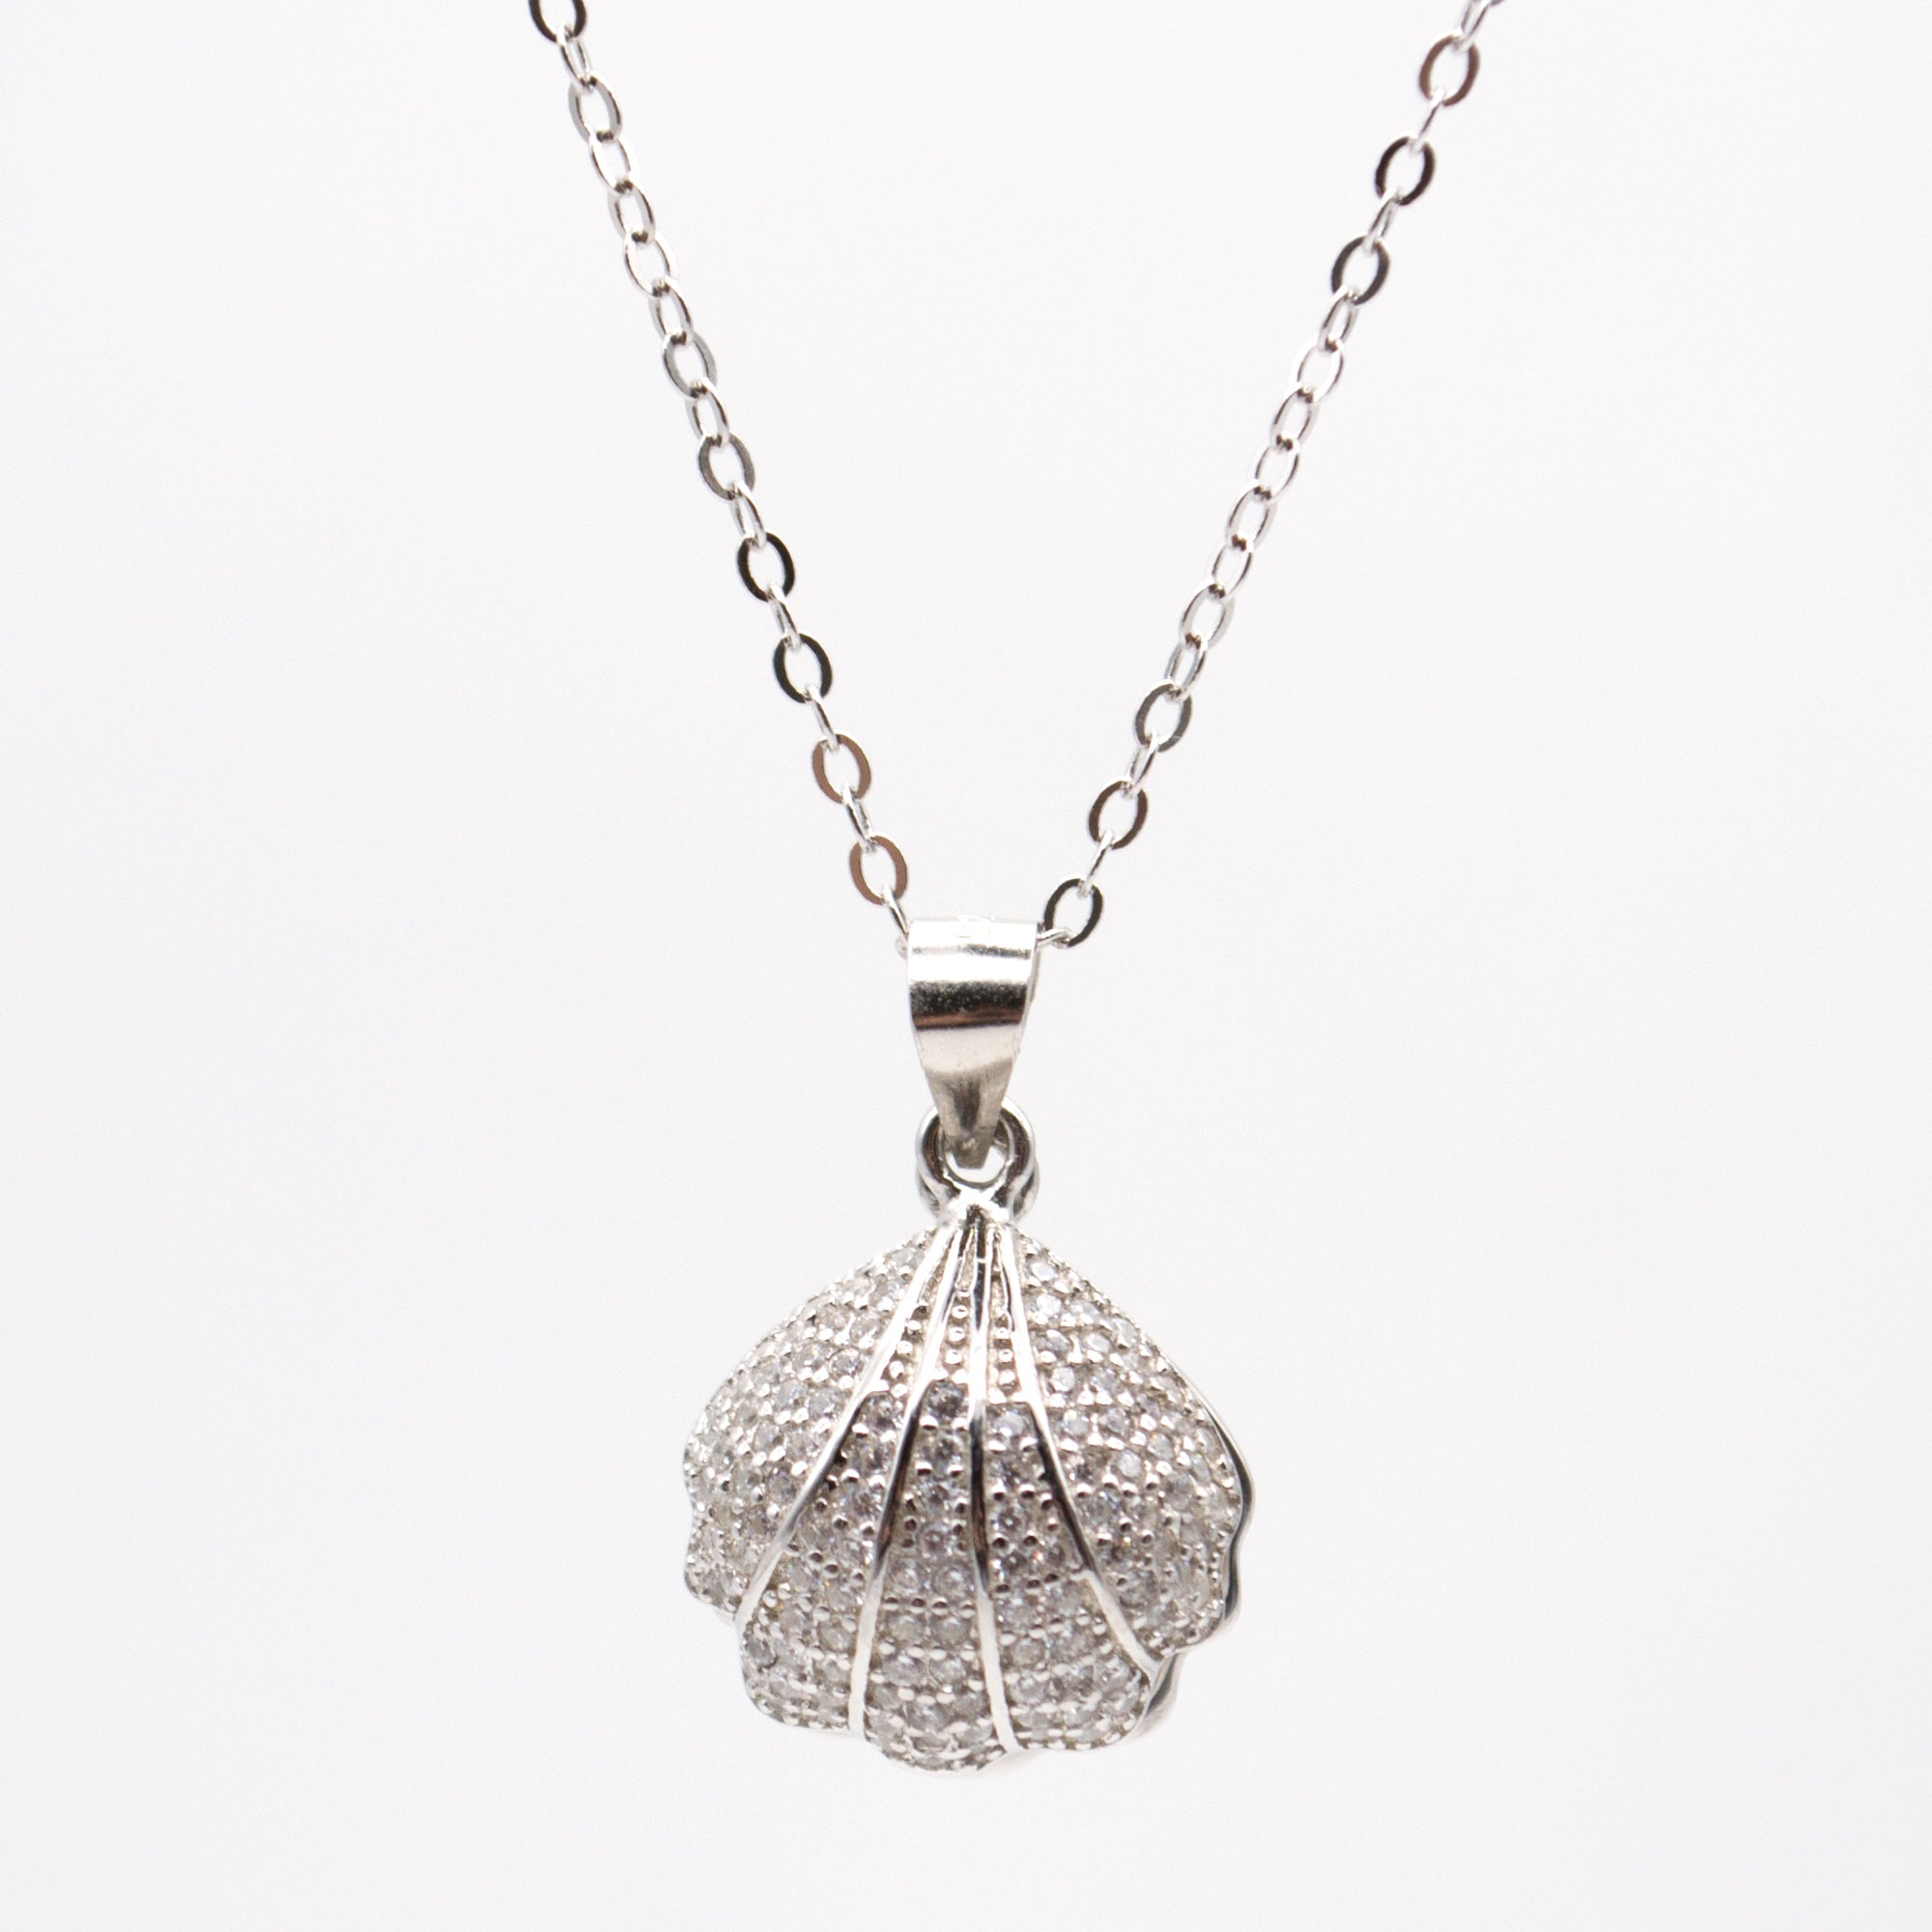 Jewdii 925 Sliver Pendant Shell & Pearl Necklace